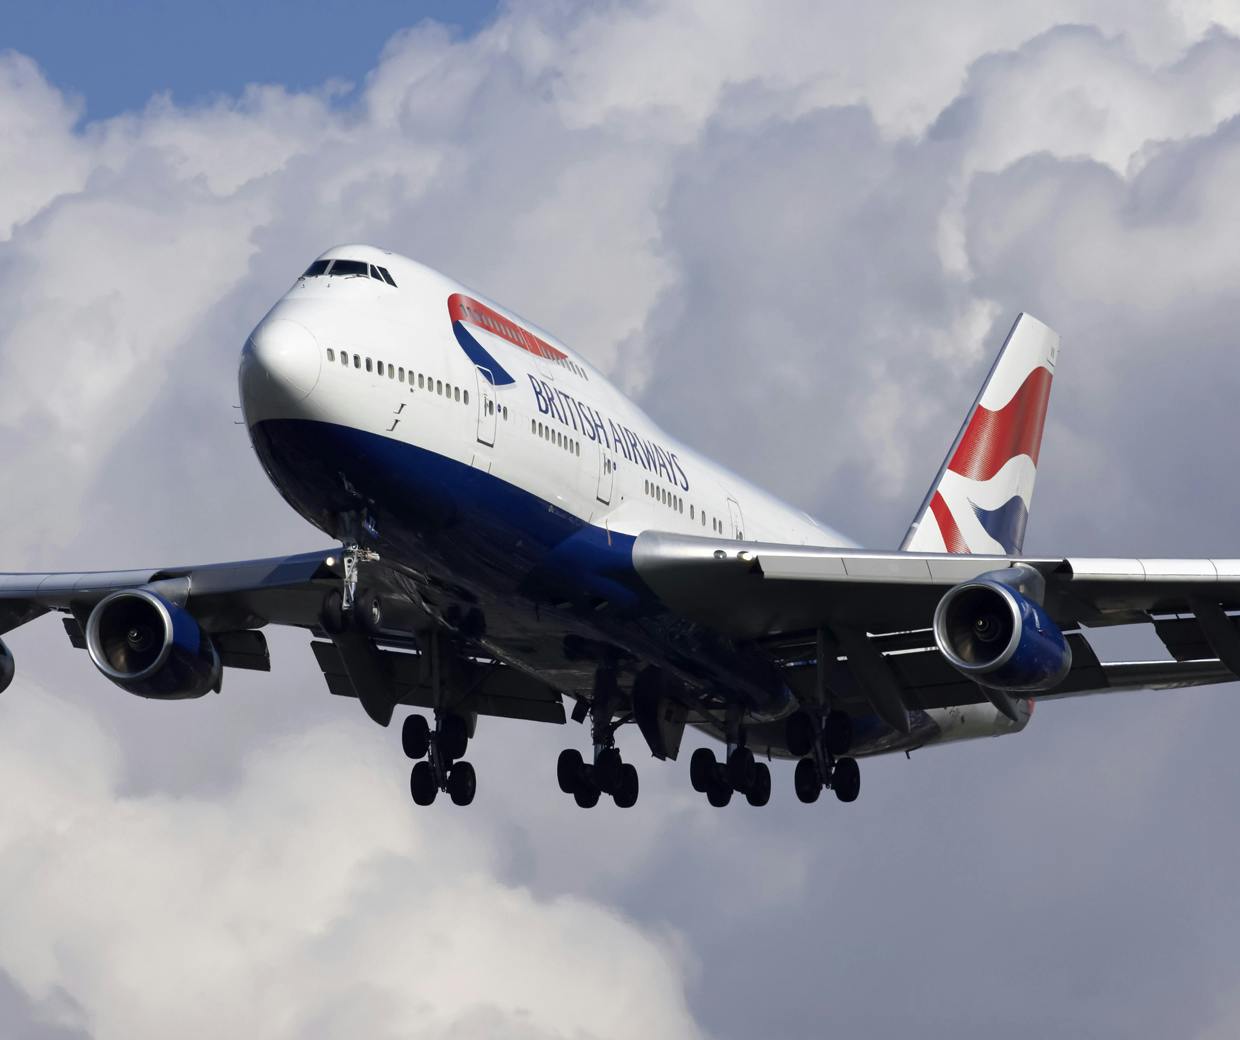 British Airways needs to ensure its reality matches up to its advertising